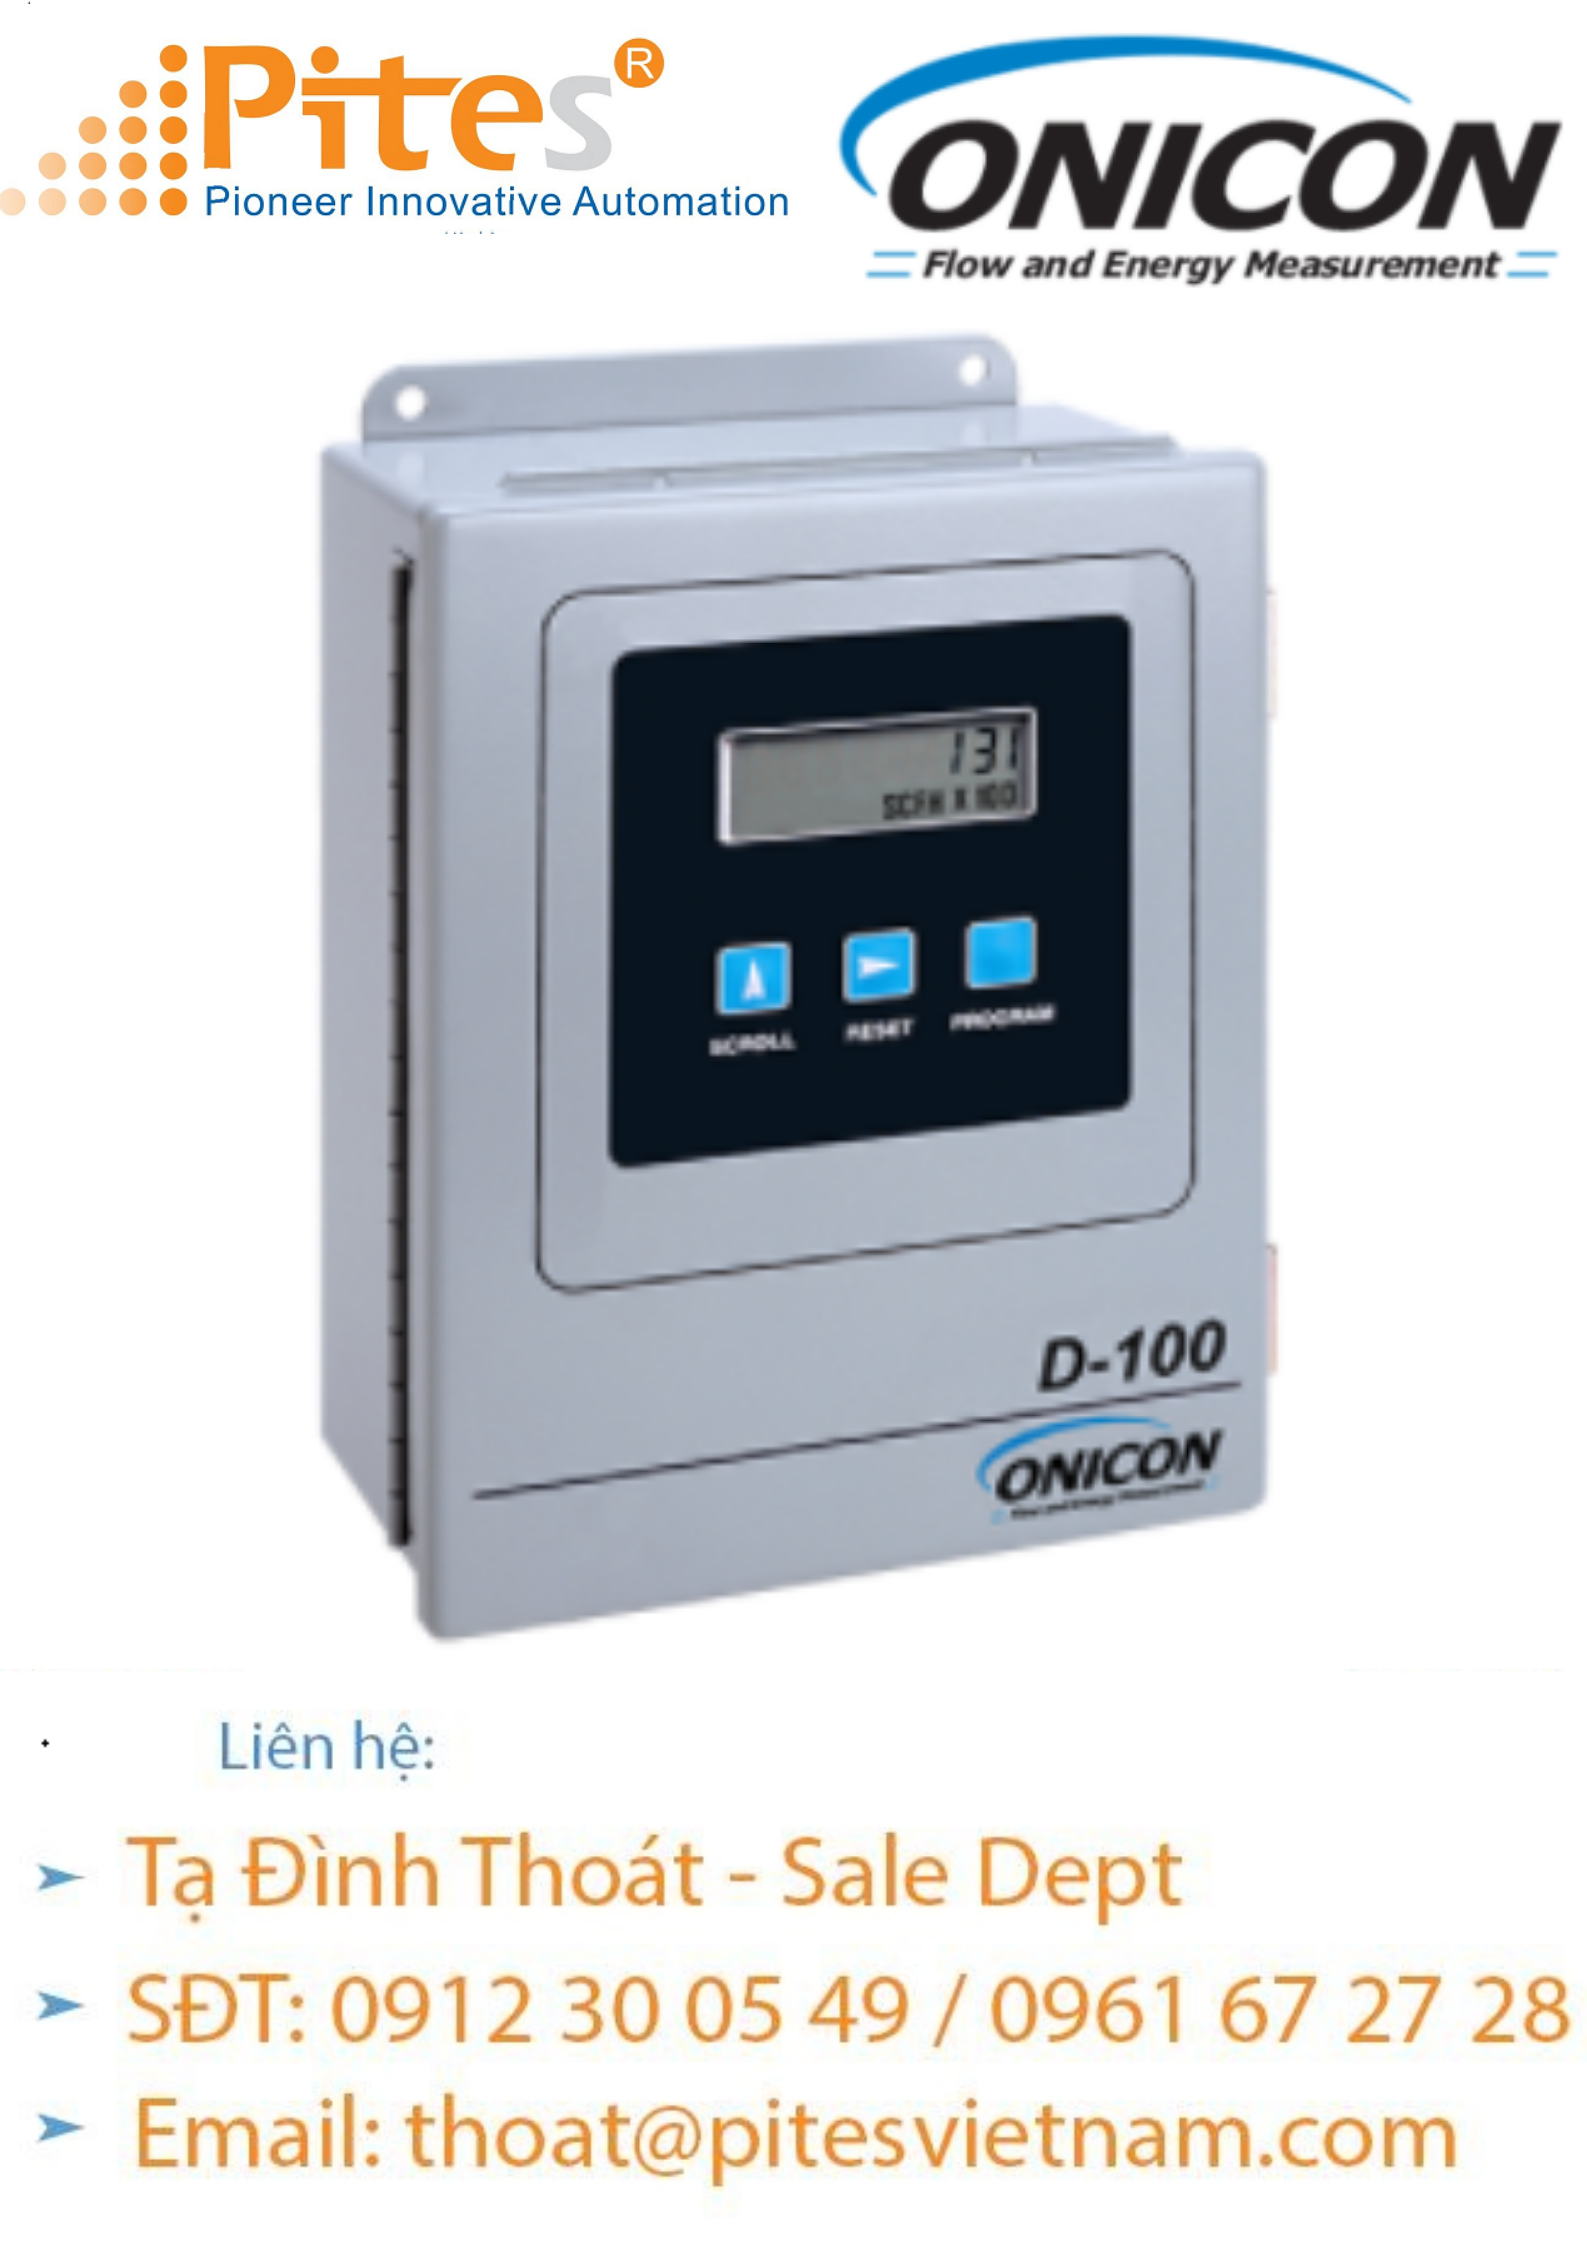 dai-ly-onicon-vietnam-onicon-viet-nam-d-100-series-flow-display-bo-hien-thi-dong-chay-dong.png